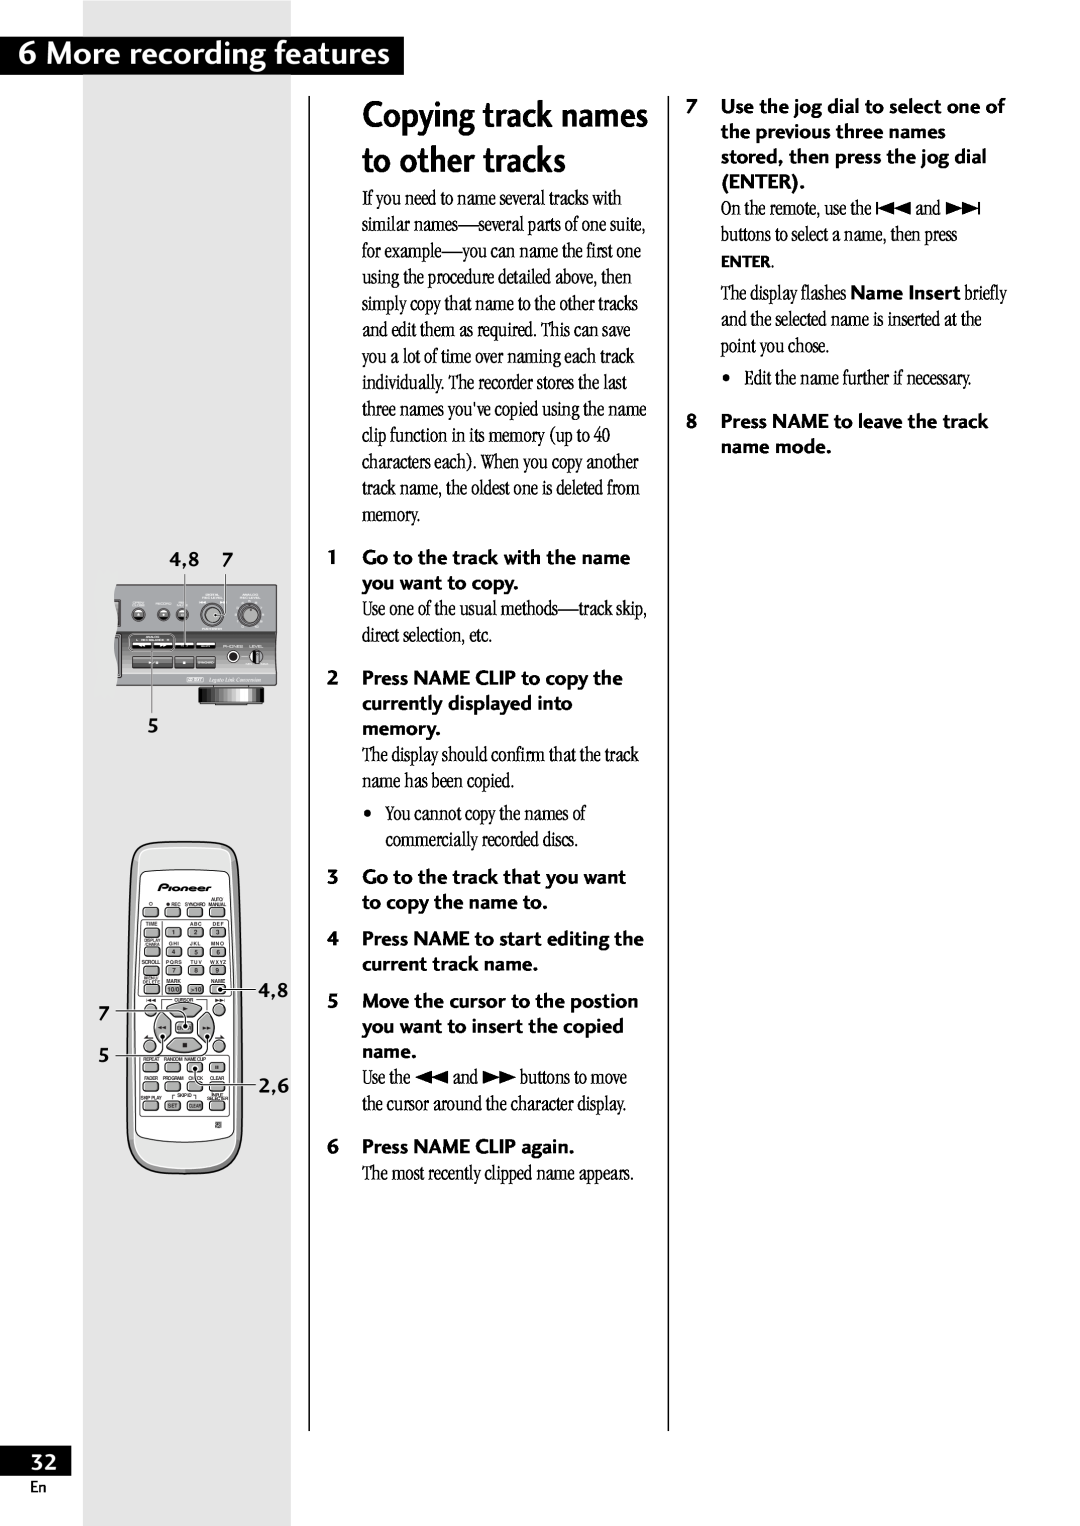 Pioneer PDR-609 operating instructions recording, Copying track names to other tracks 